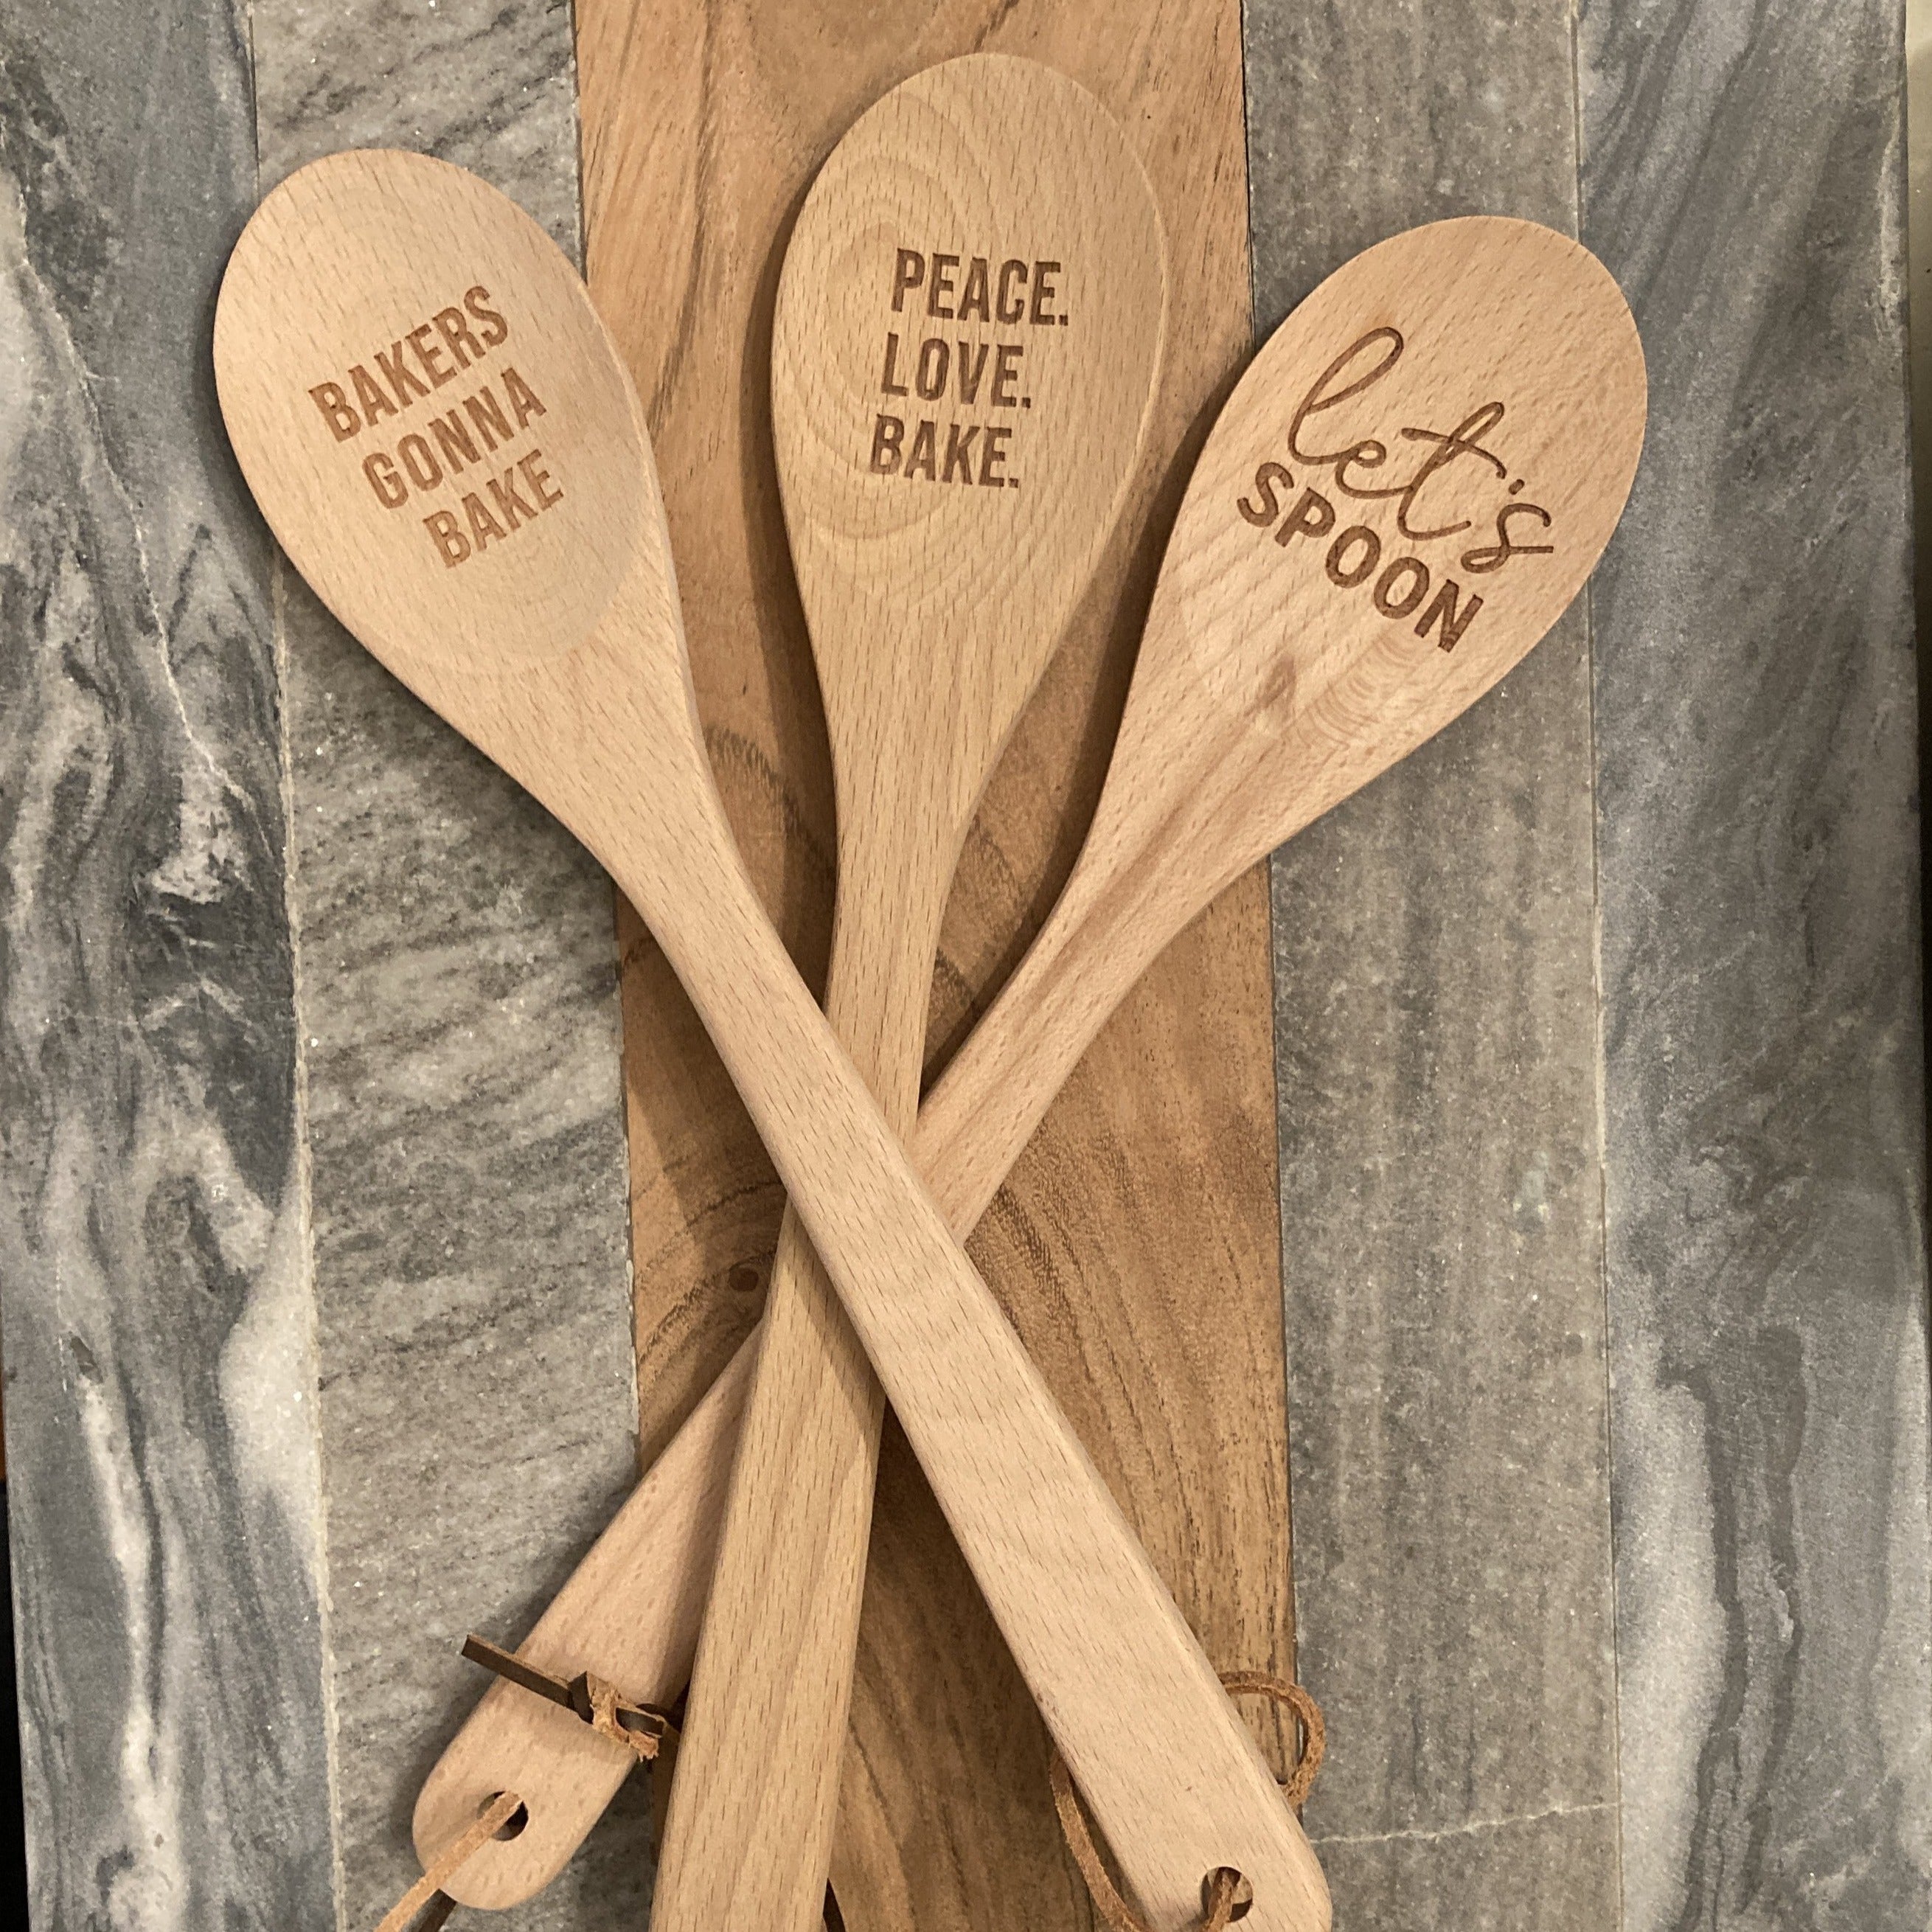 Wooden Spoons with Quirky sayings